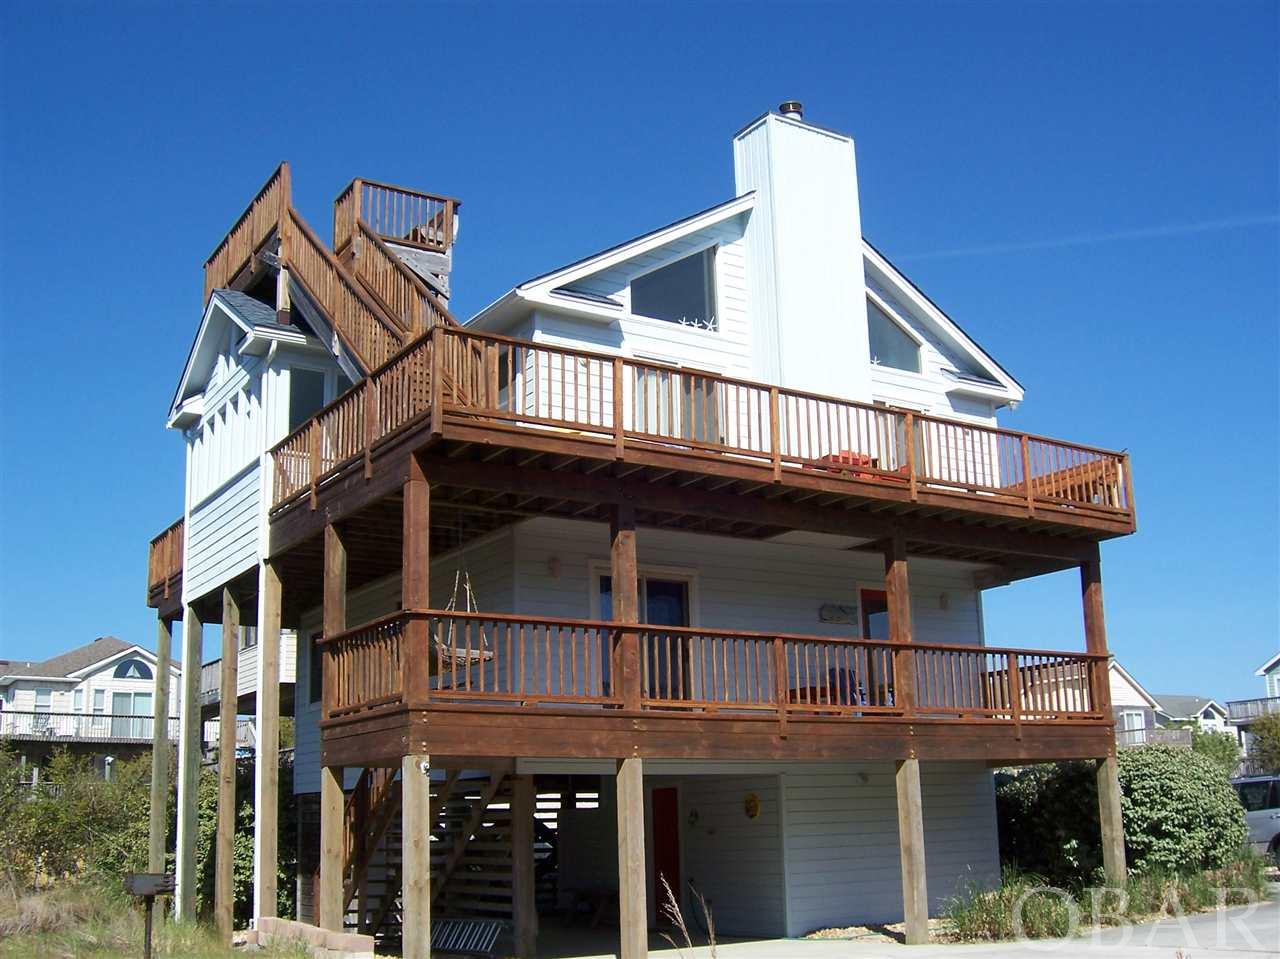 762 Lakeshore Court Lot #32 Outer Banks Home Listings - Holleay Parcker - Spinnaker Realty Outer Banks (OBX) Real Estate